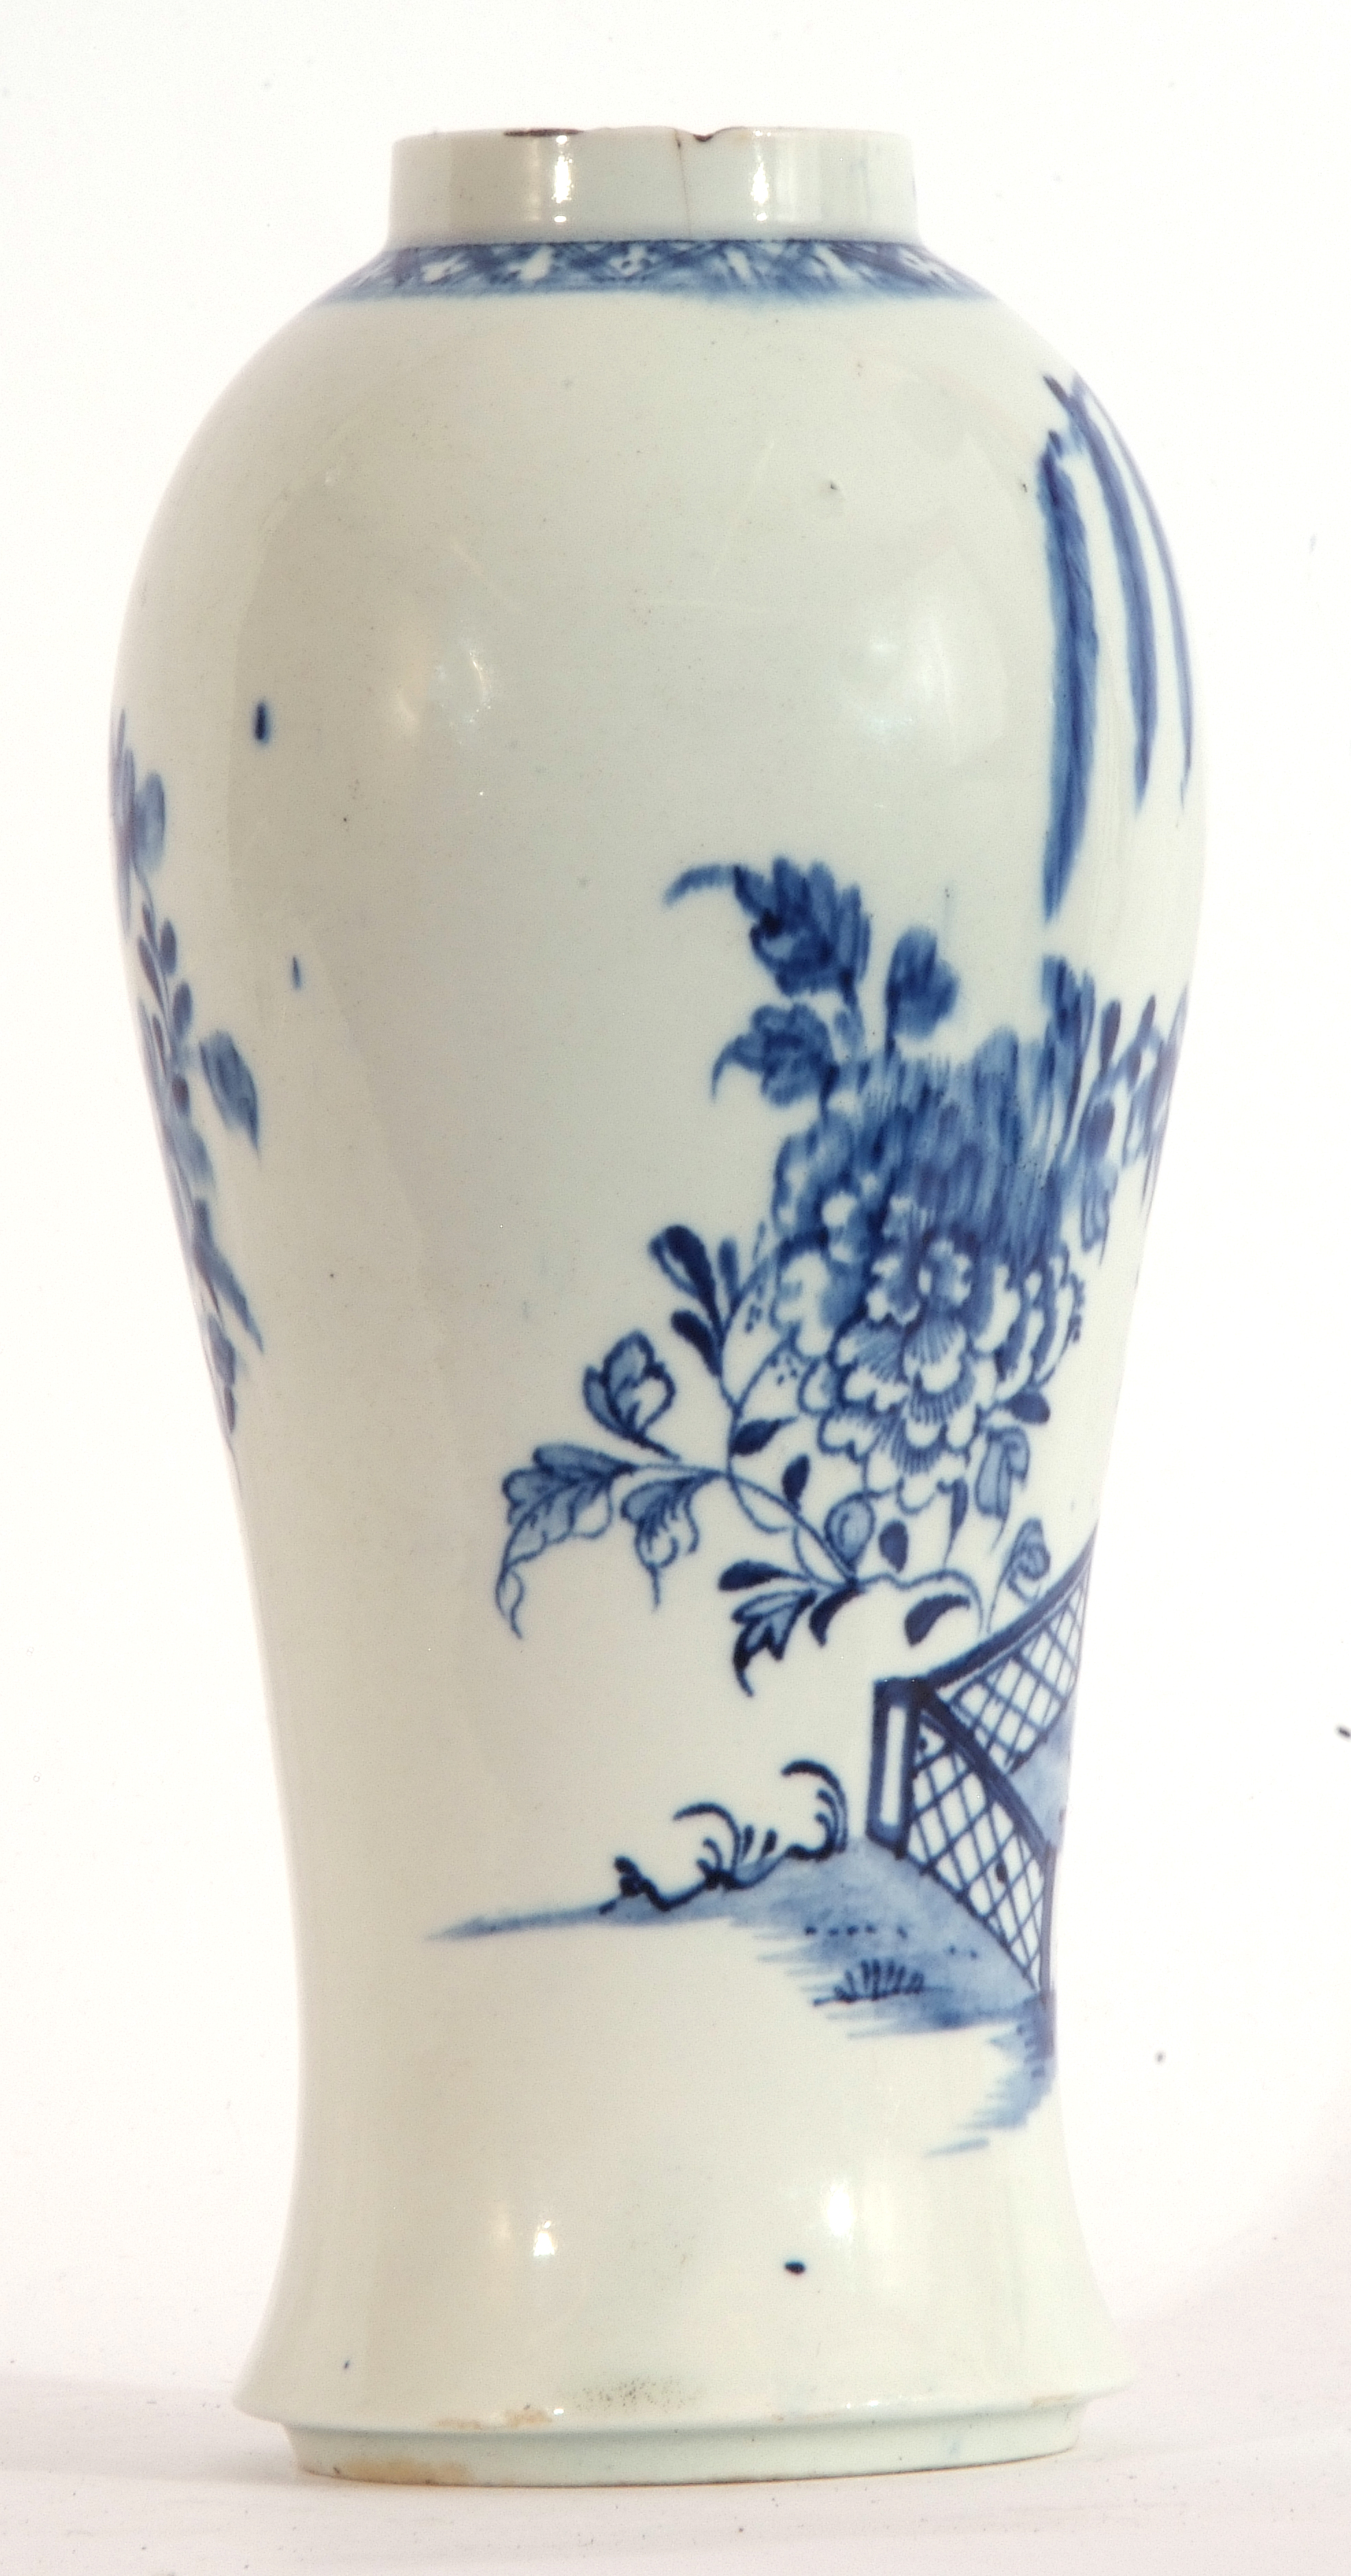 Lowestoft porcelain baluster vase decorated in underglaze blue with a fence and trees and floral - Image 5 of 7